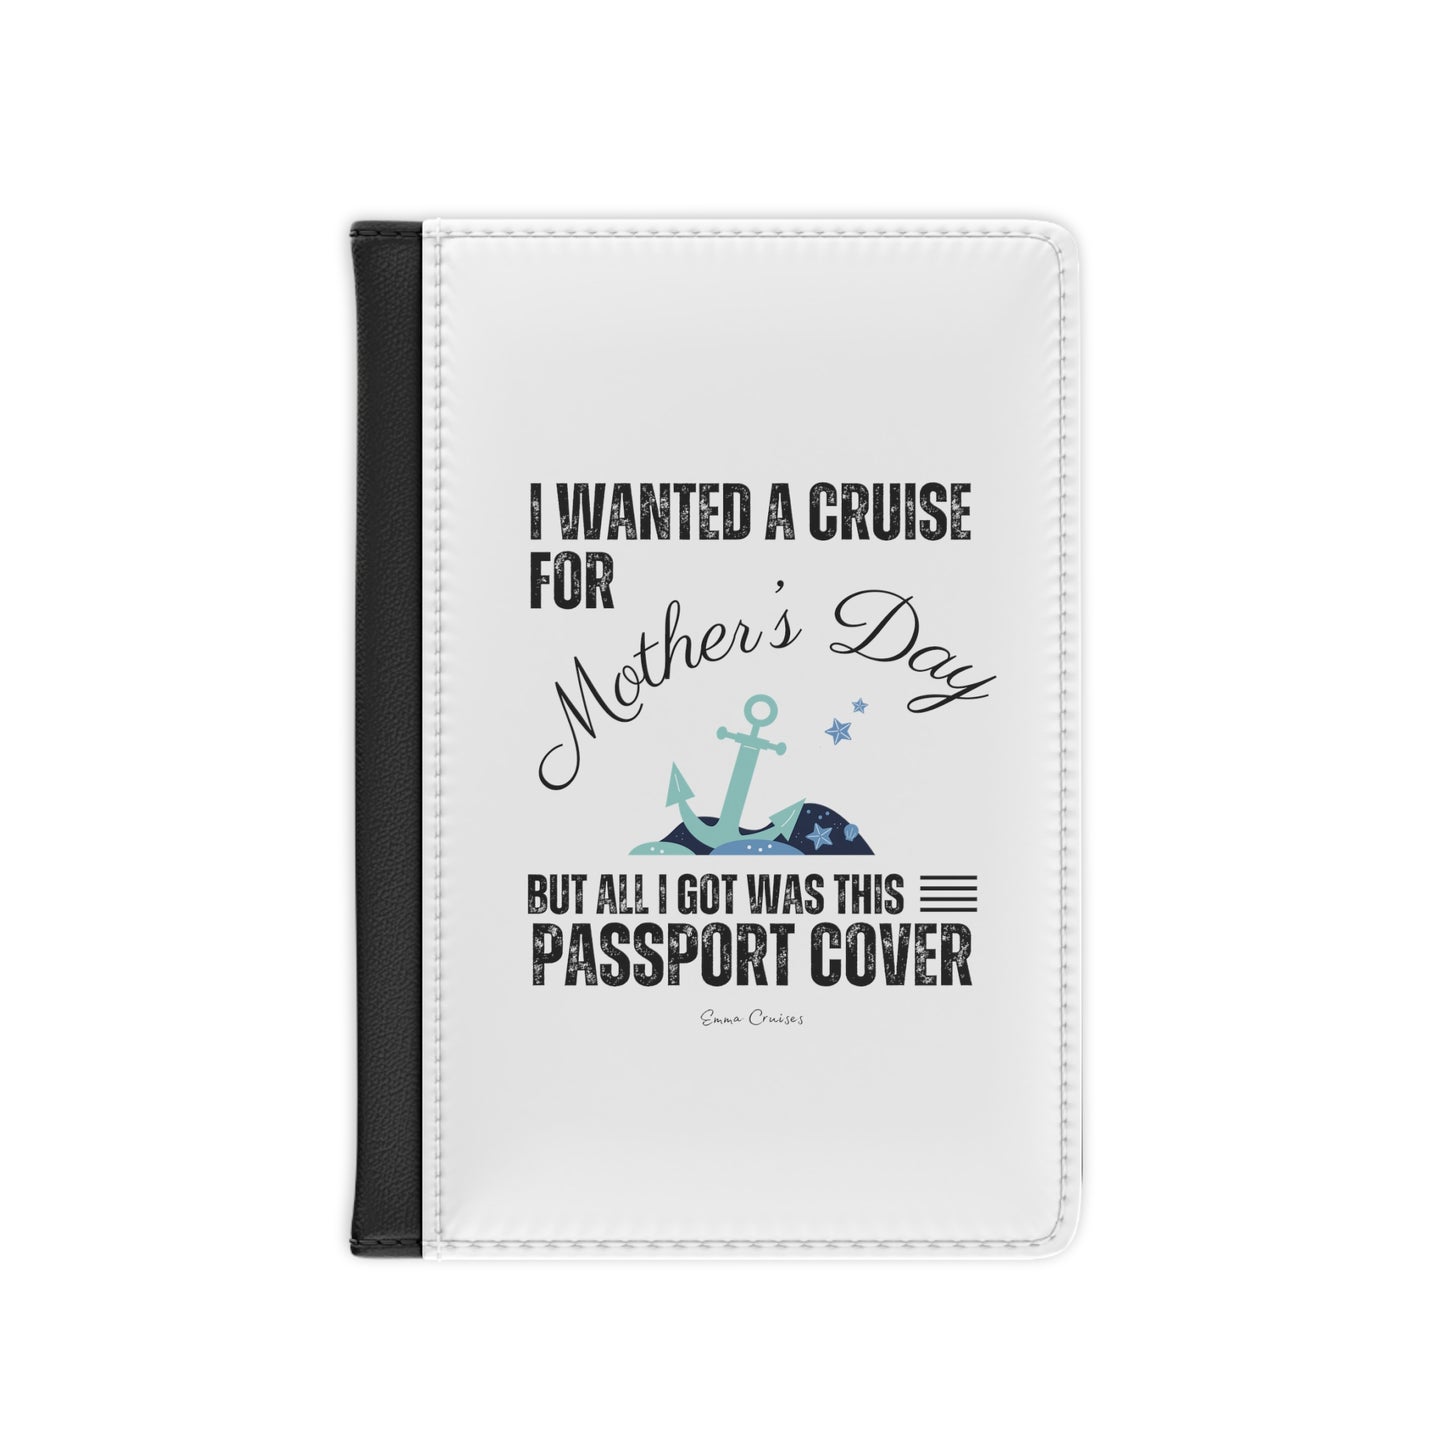 I Wanted a Cruise for Mother's Day - Passport Cover